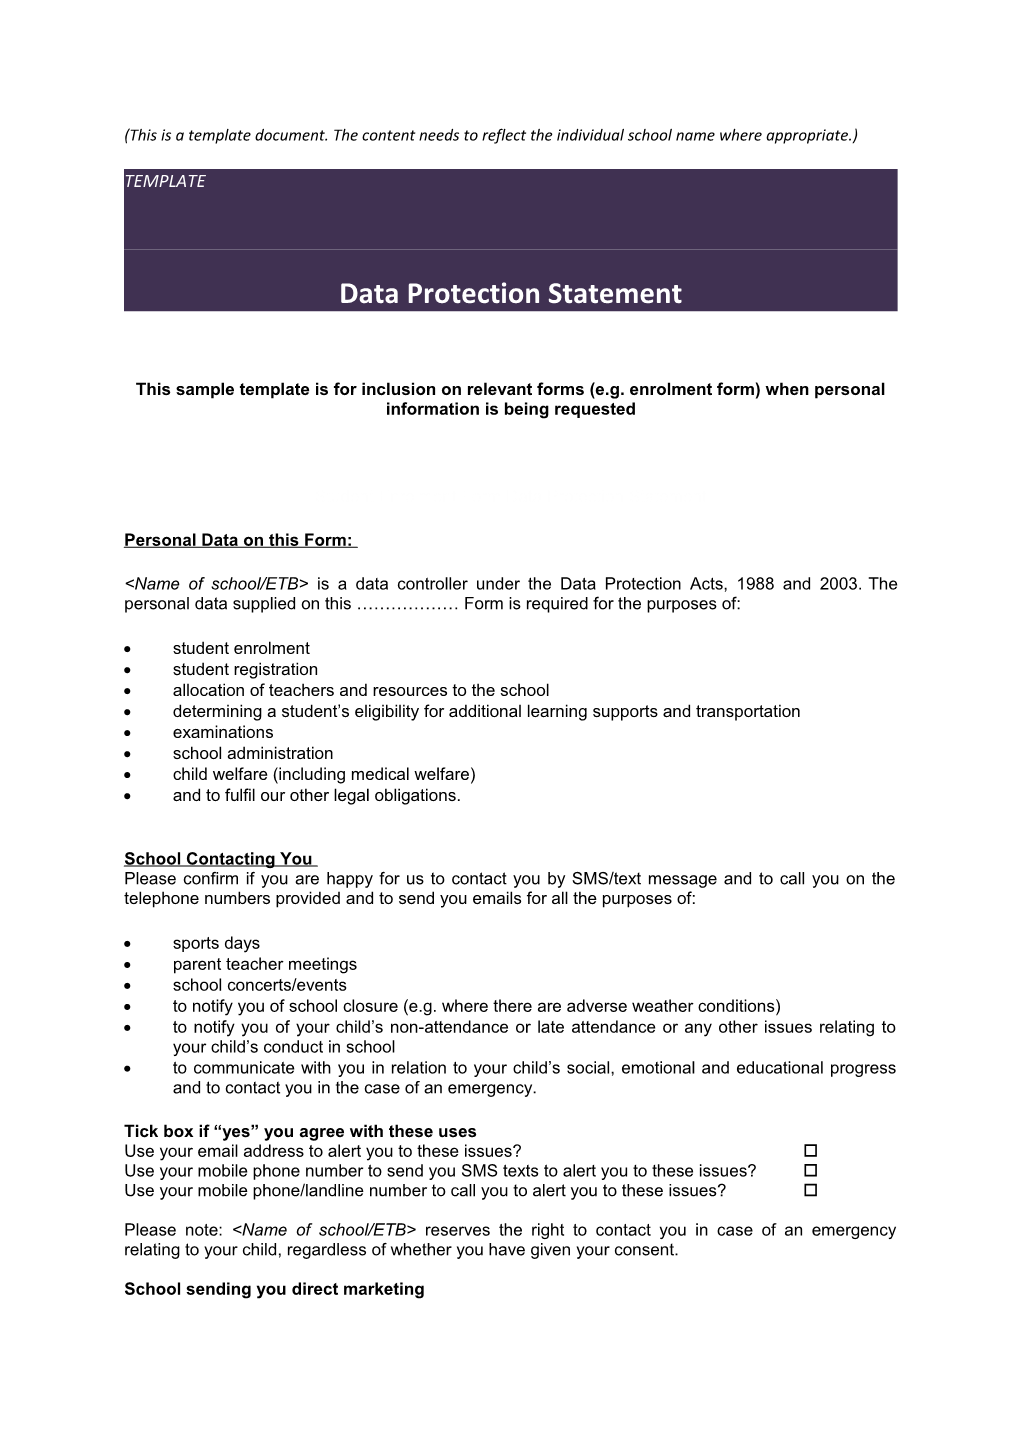 Data Protection Statement